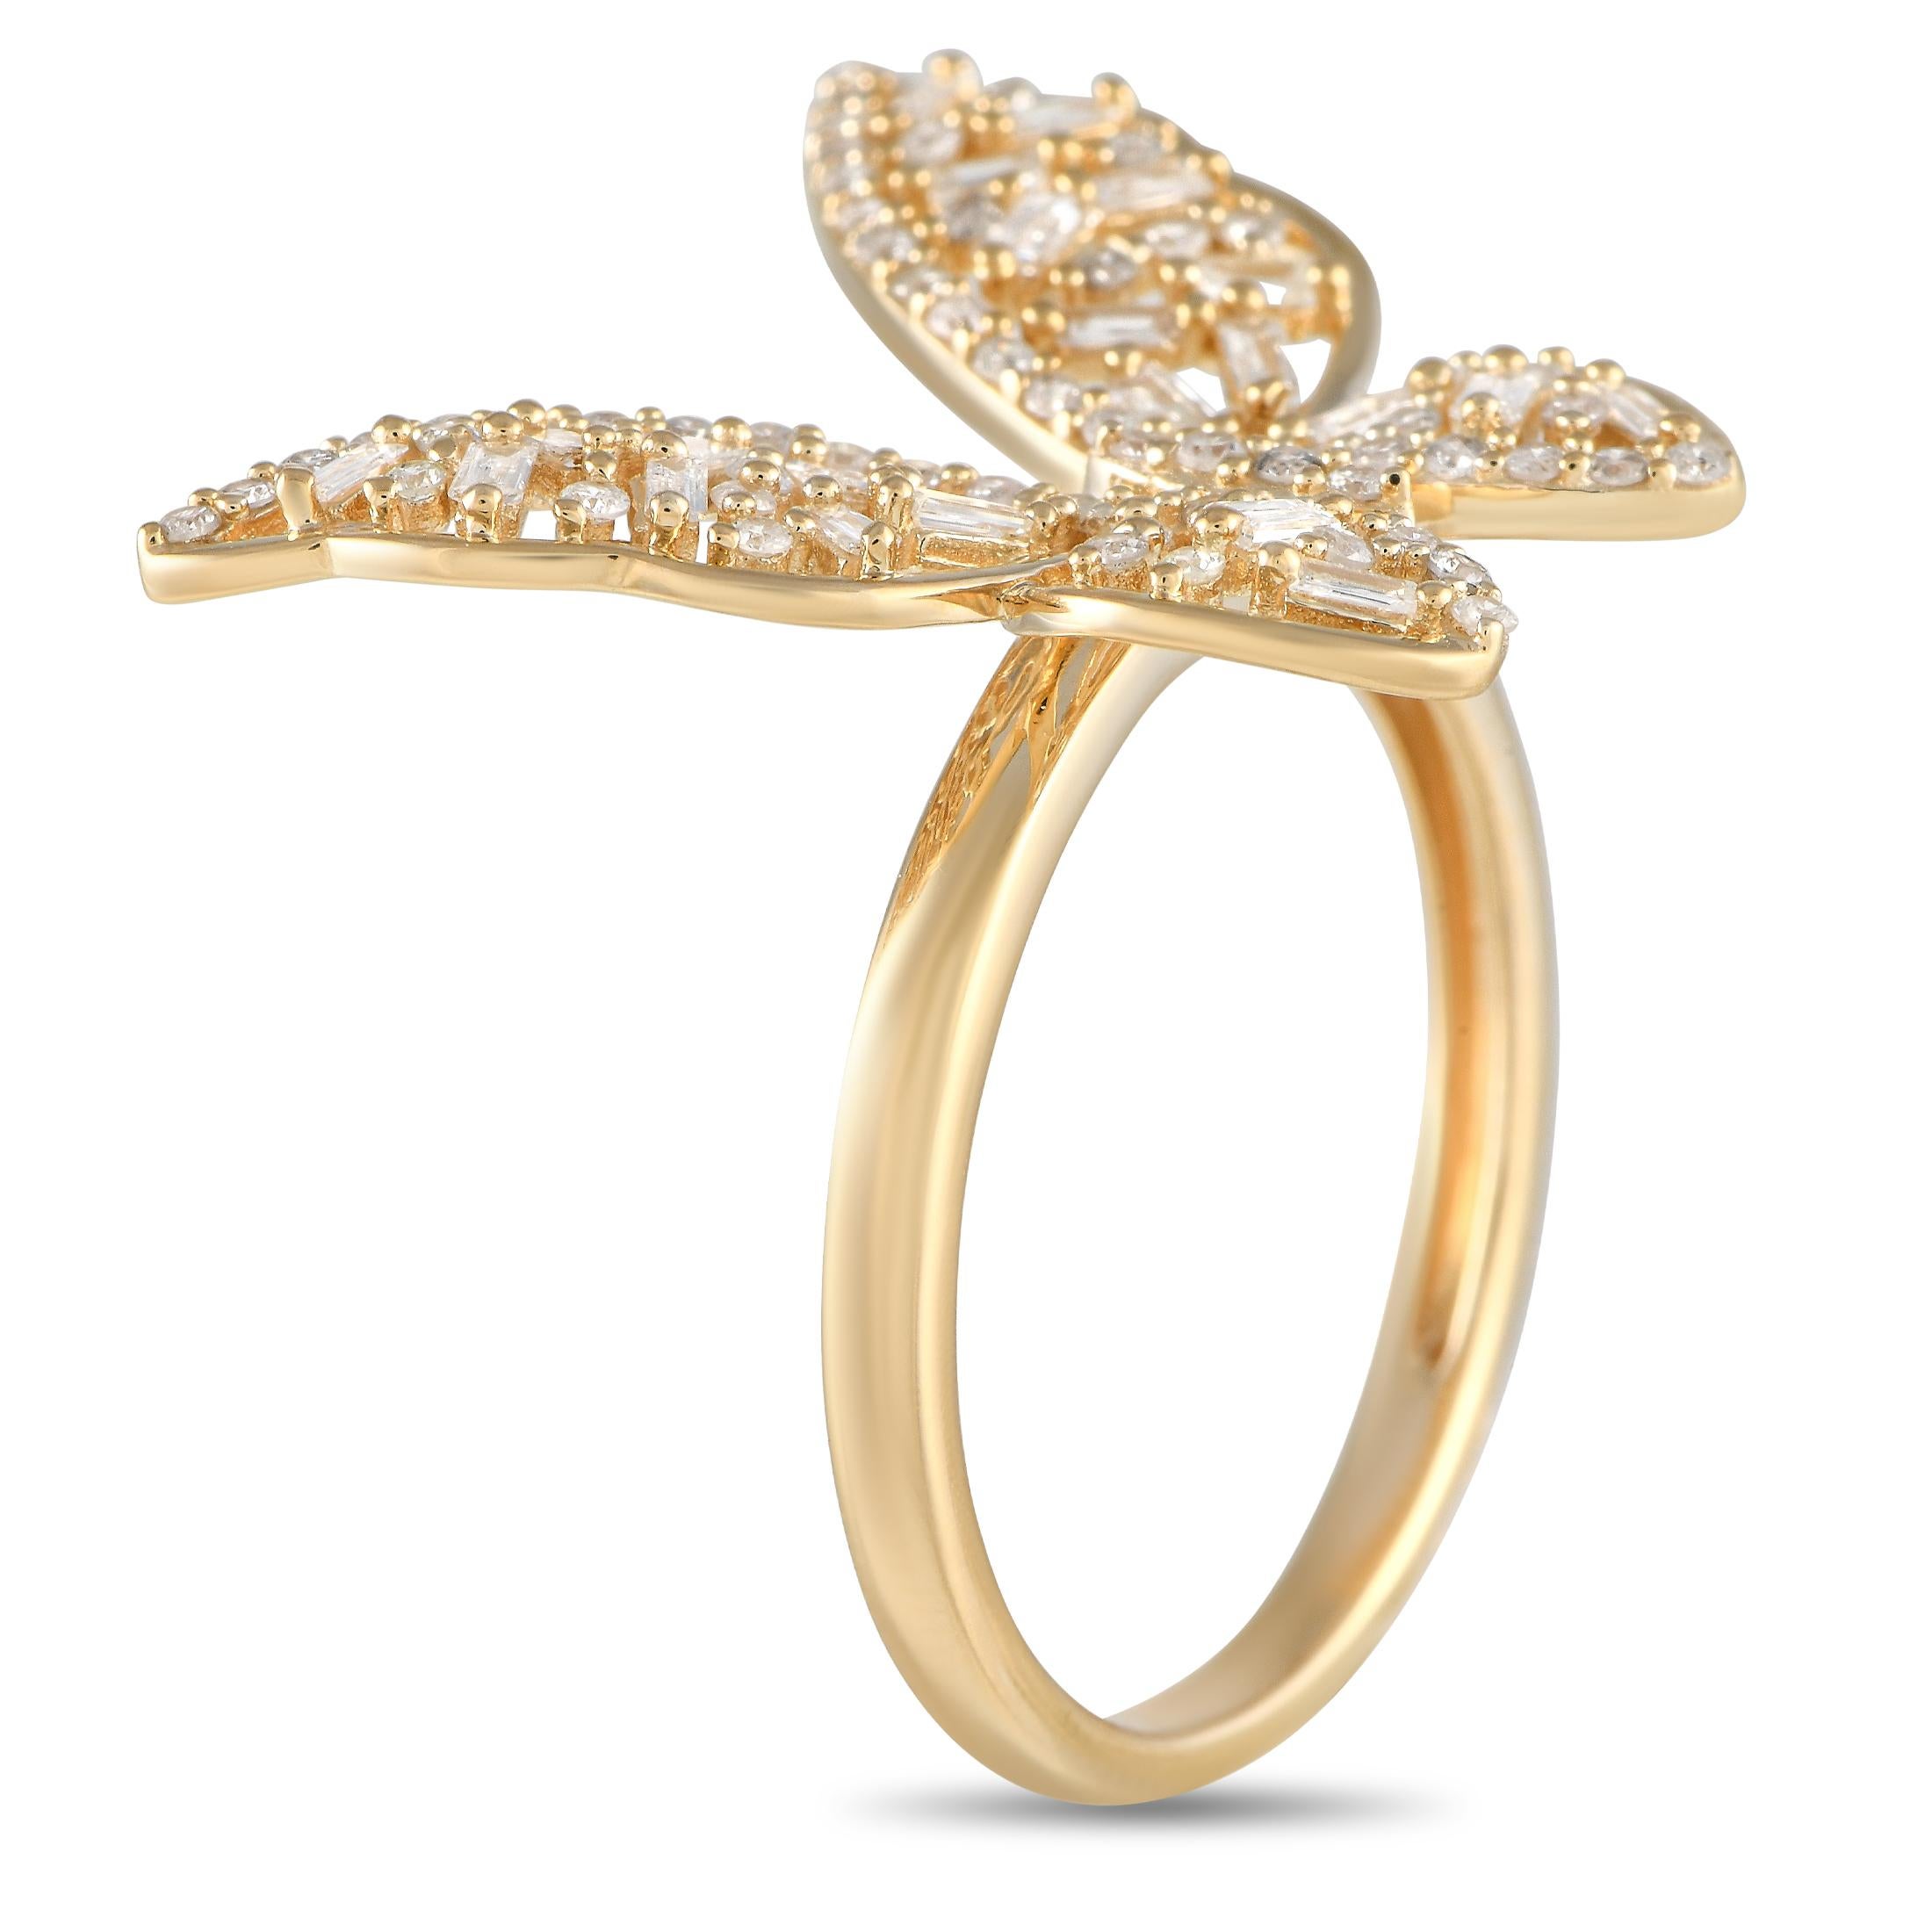 This sparkler will easily find its place in a fun-loving wardrobe. The ring has a delicate yellow gold band measuring only 1mm thick. It is topped with a sculpted butterfly designed with a diamond-dotted marquise bezel as its body and a combination